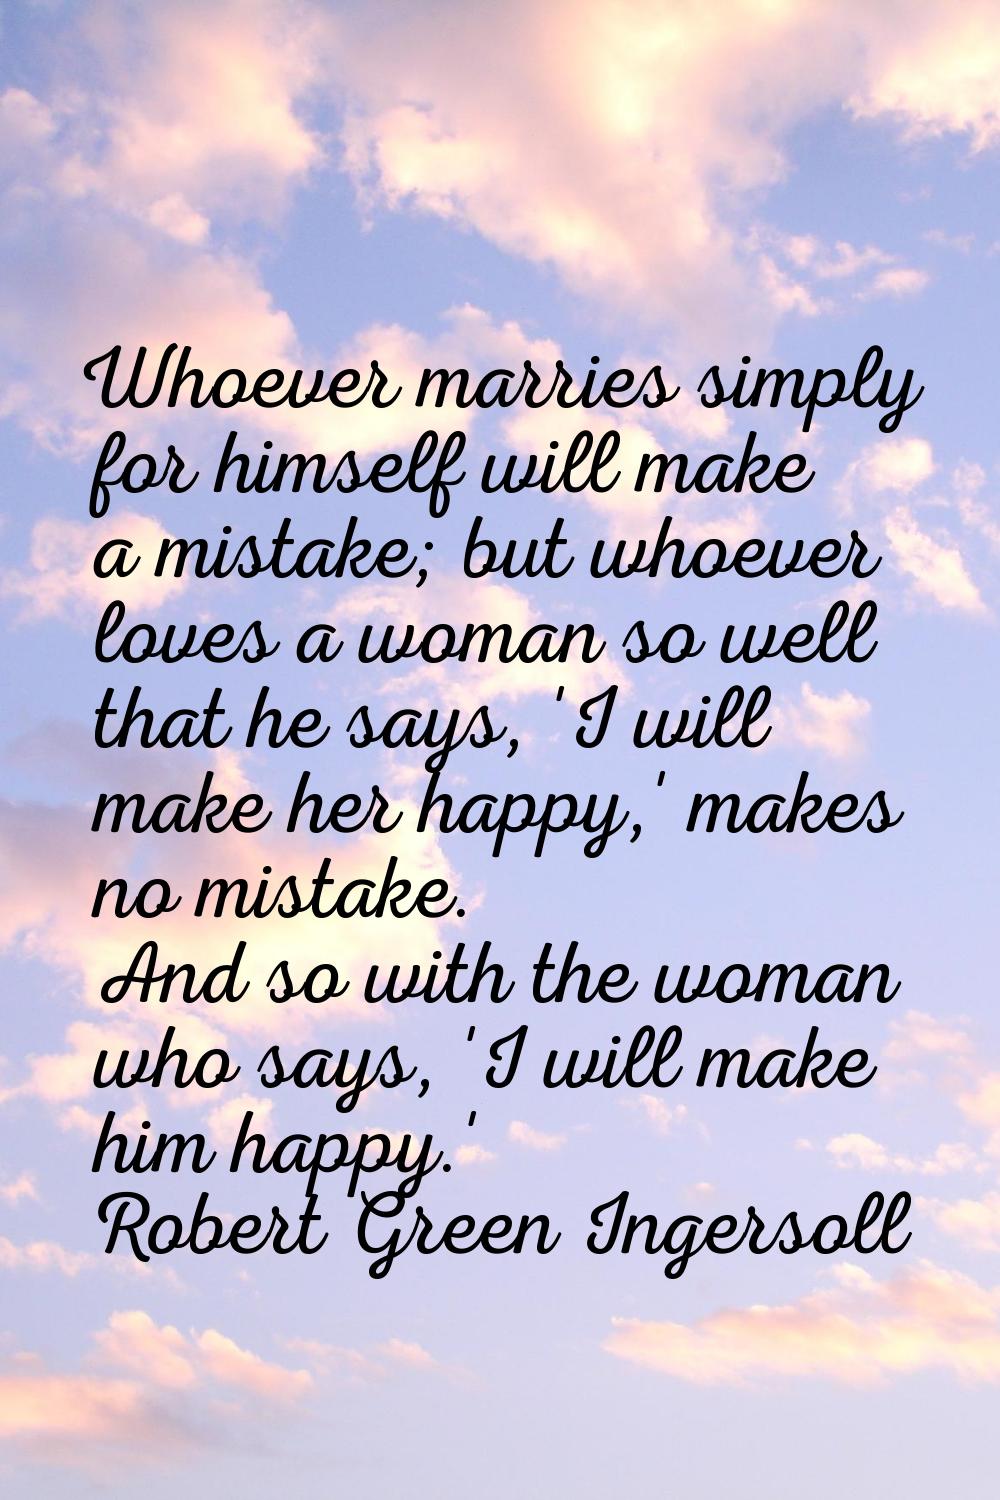 Whoever marries simply for himself will make a mistake; but whoever loves a woman so well that he s